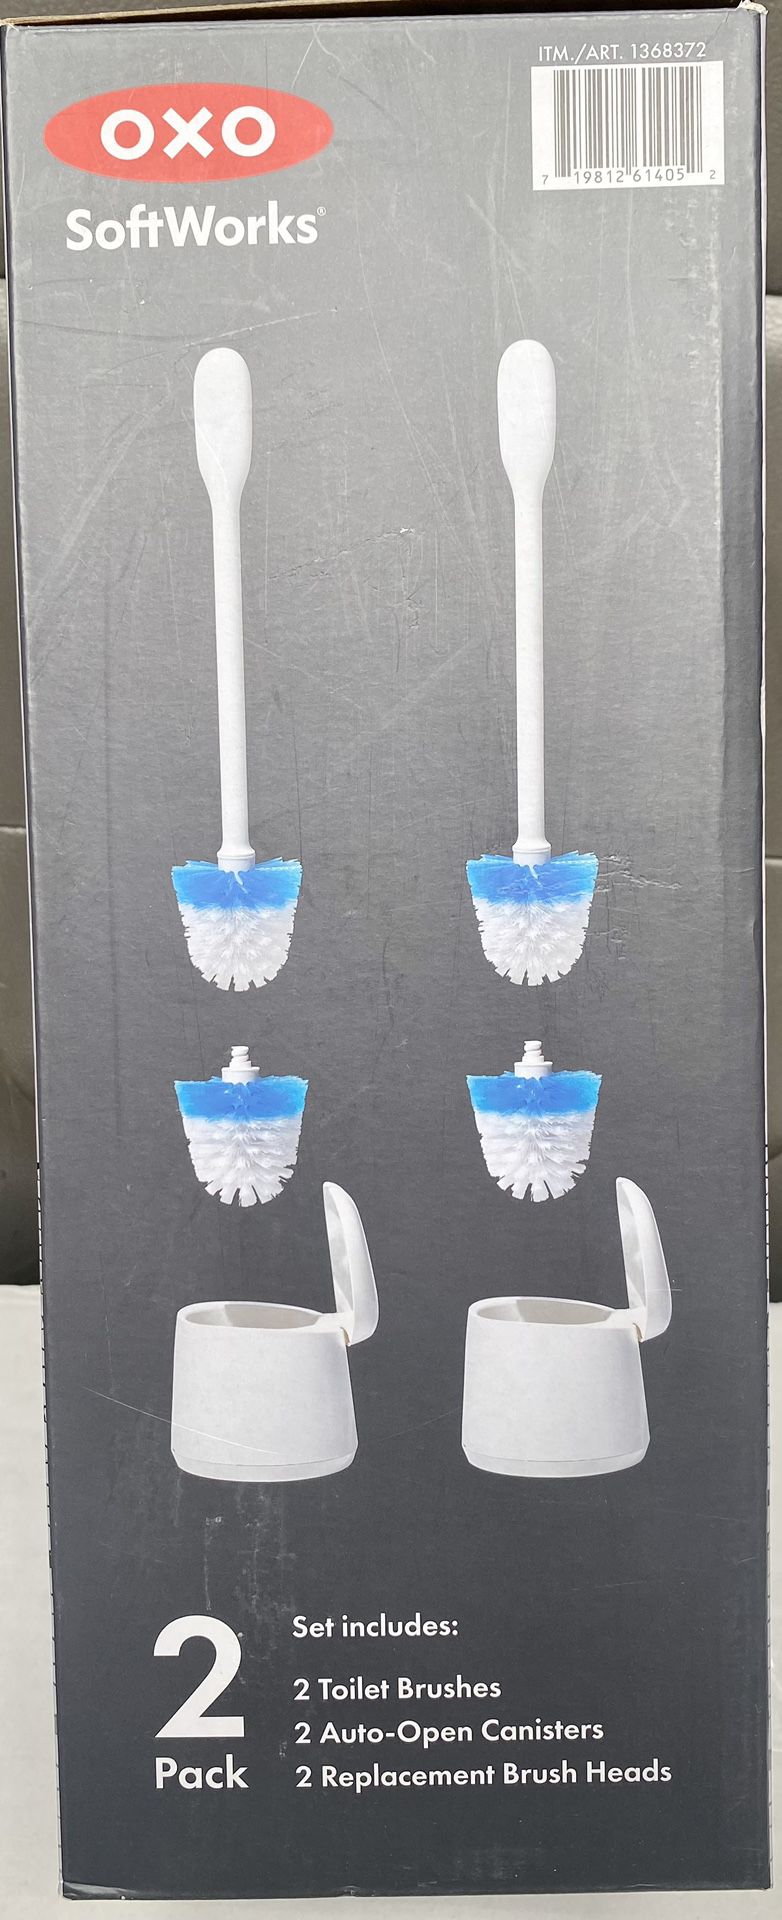 OXO SoftWorks 2-pack Toilet Brush Set with Replacement Heads - NEW 